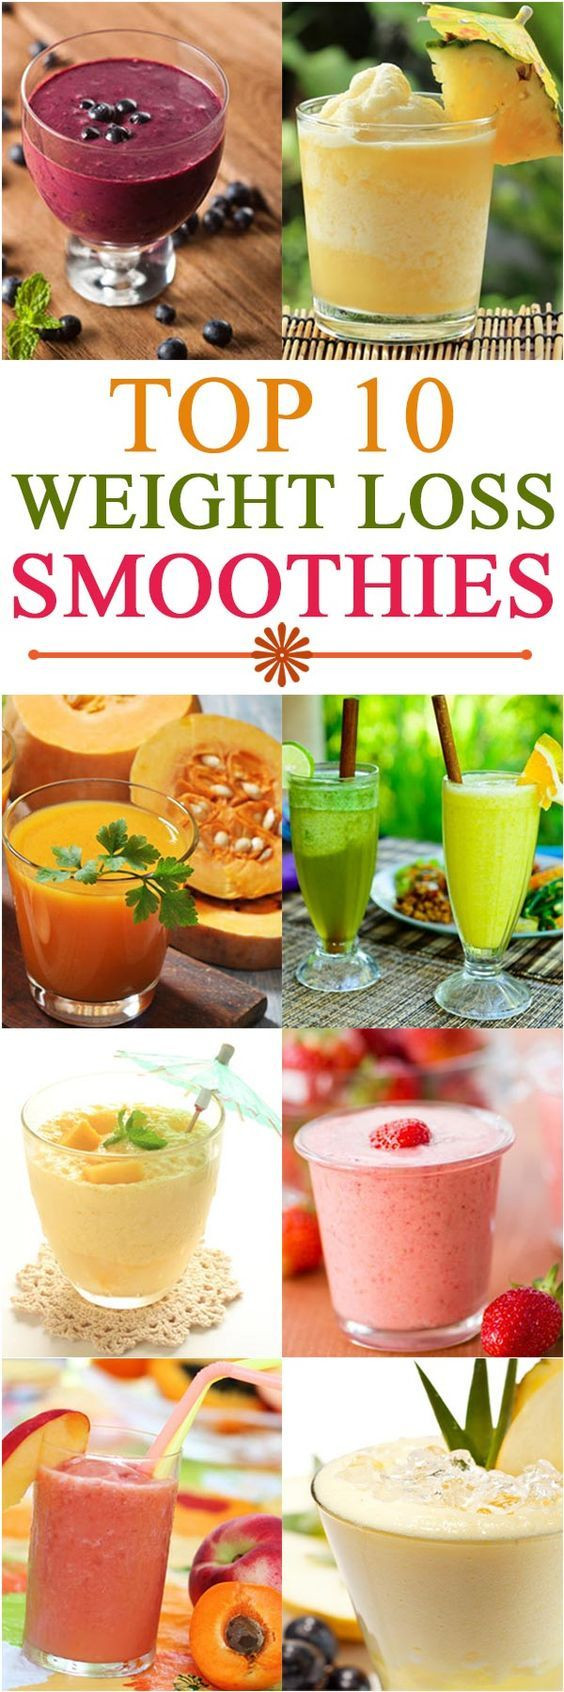 Drinking Smoothies Everyday For Weight Loss
 10 Amazing Weight Loss Drinks